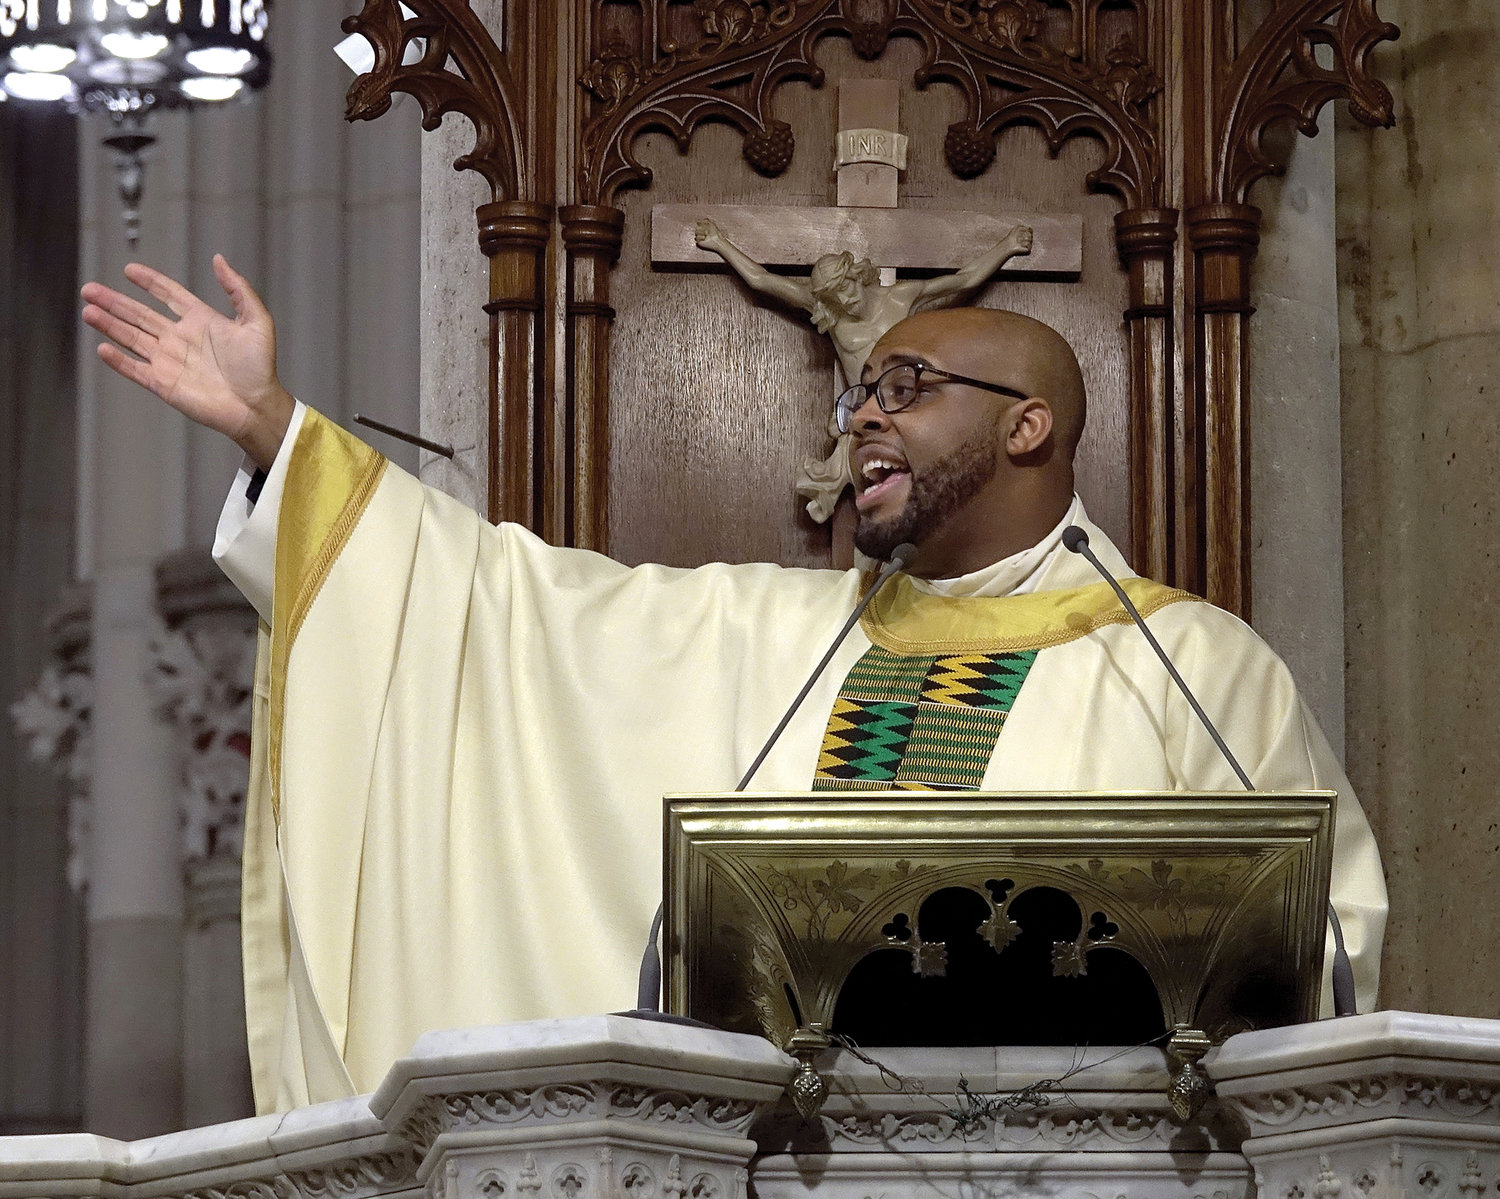 Father Kareem Smith delivers the homily.